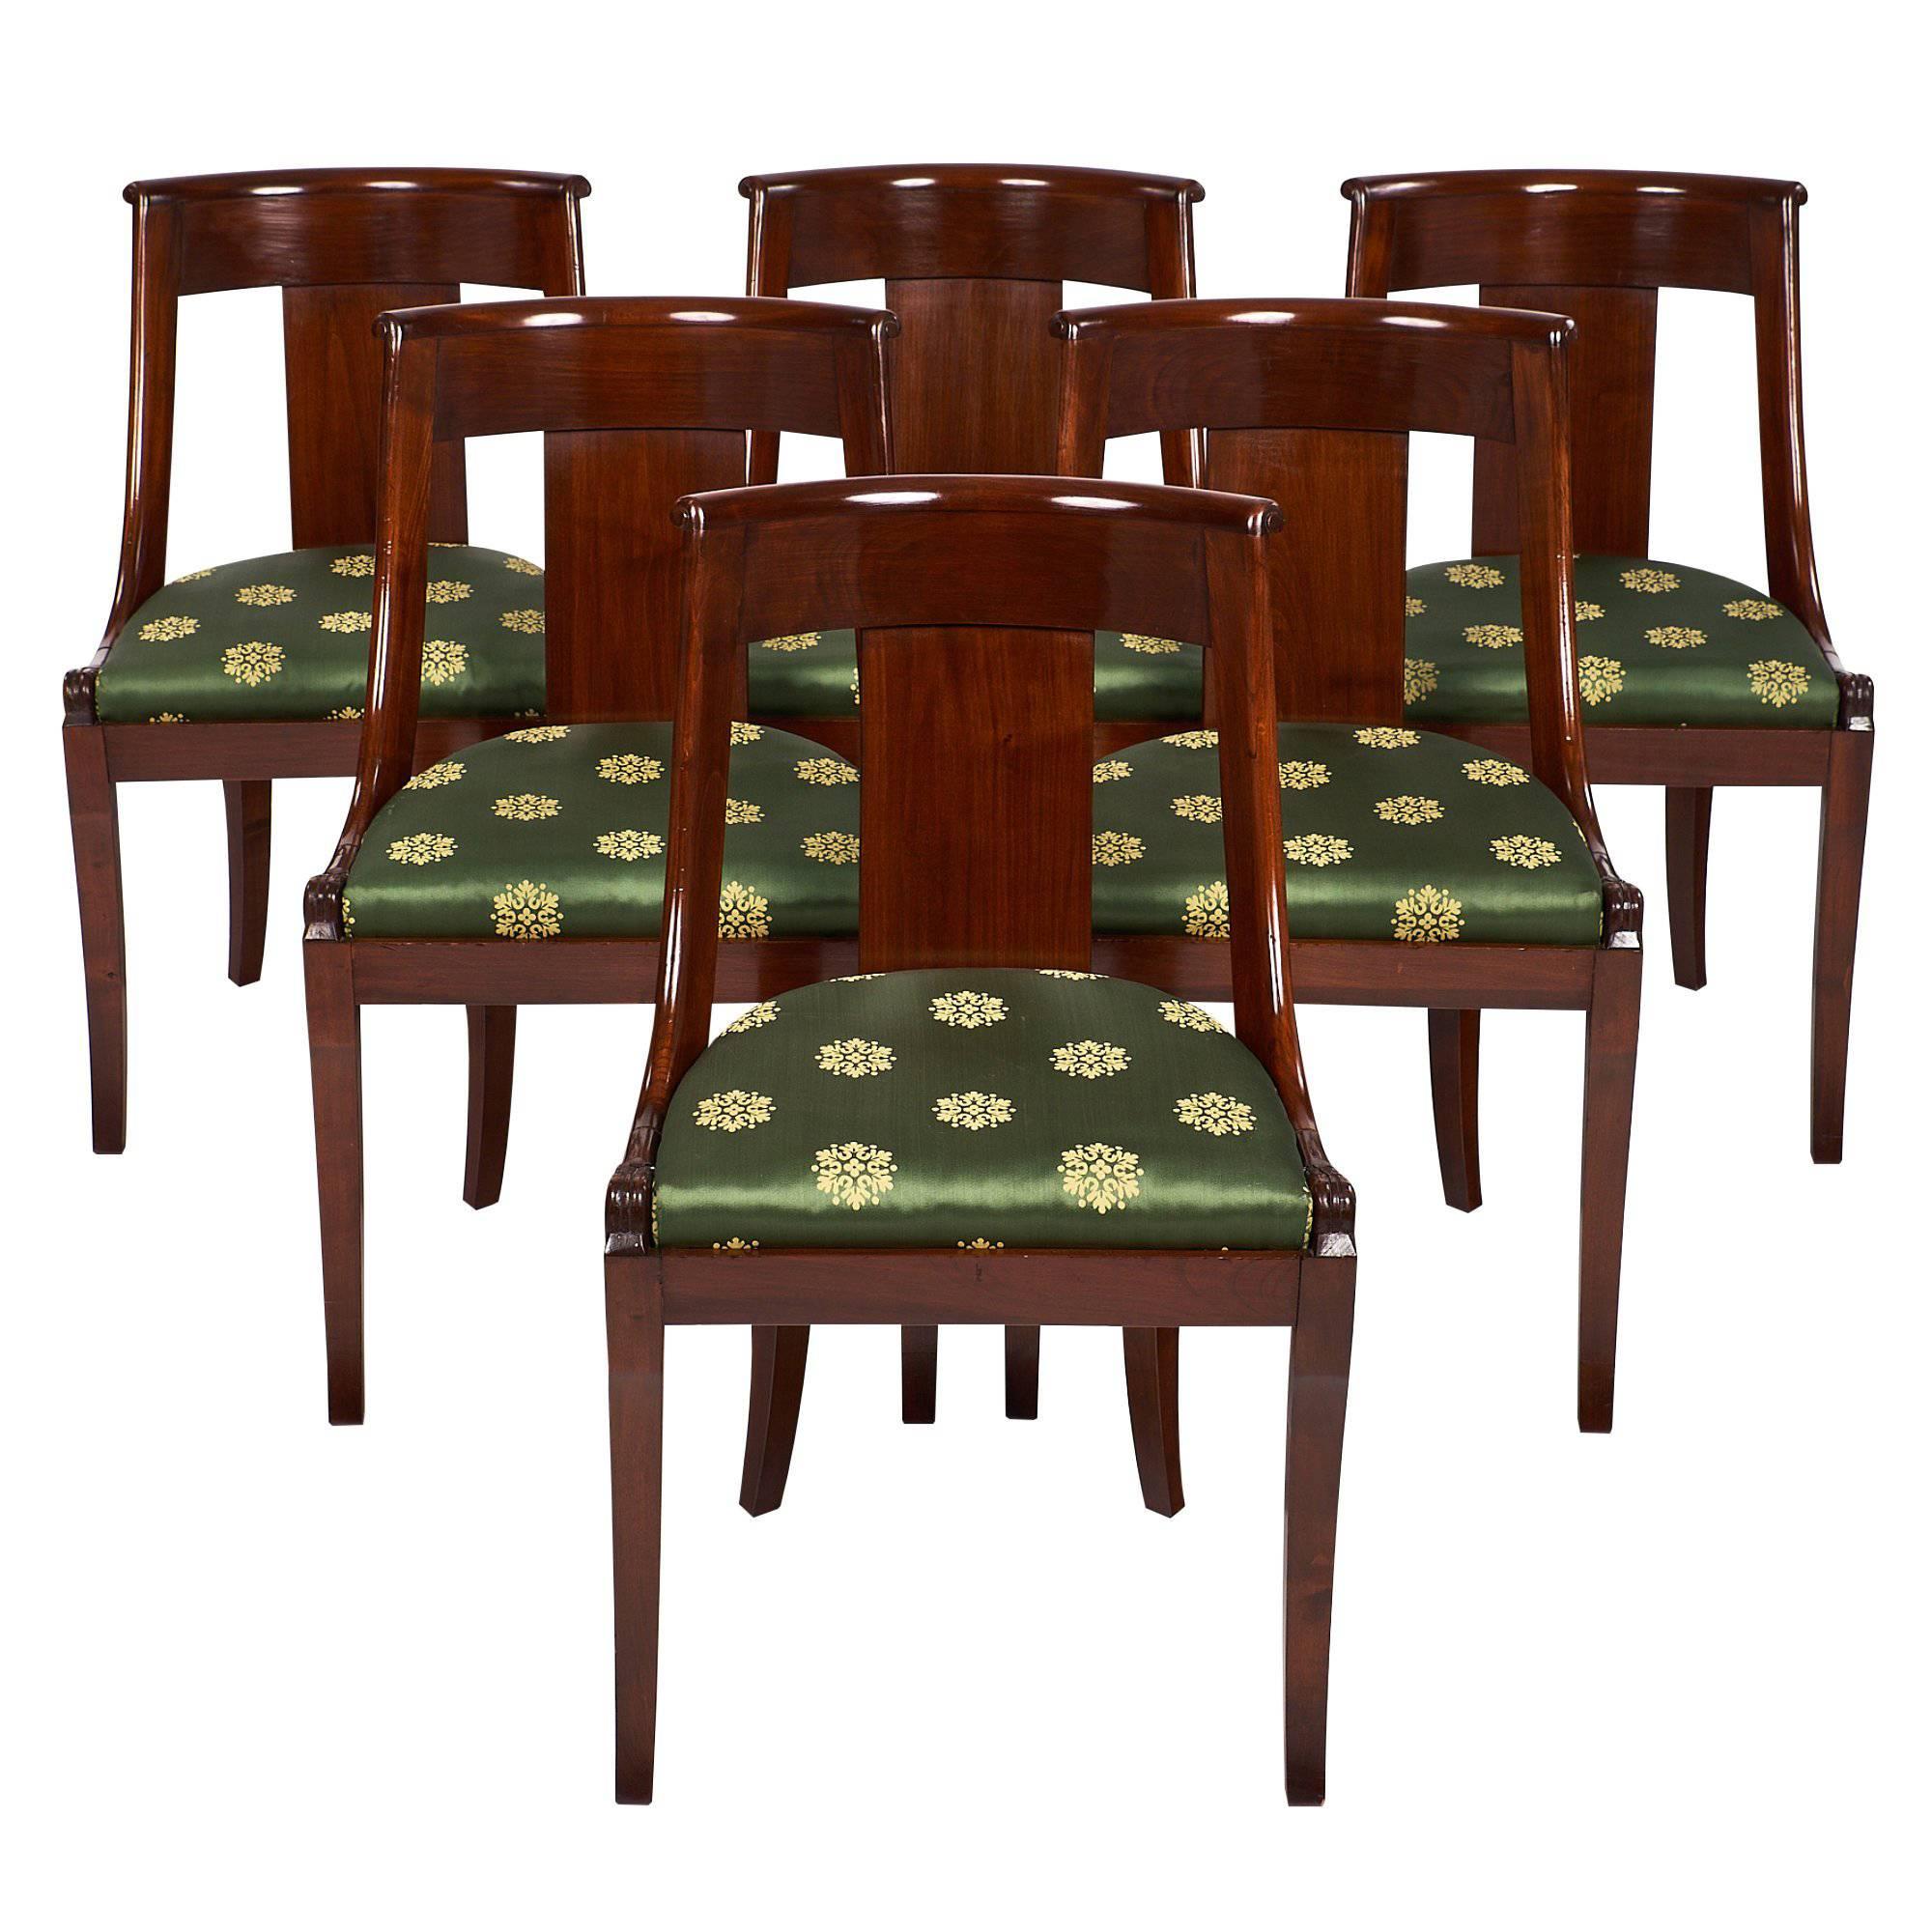 French Empire Set of “Gondole” Chairs